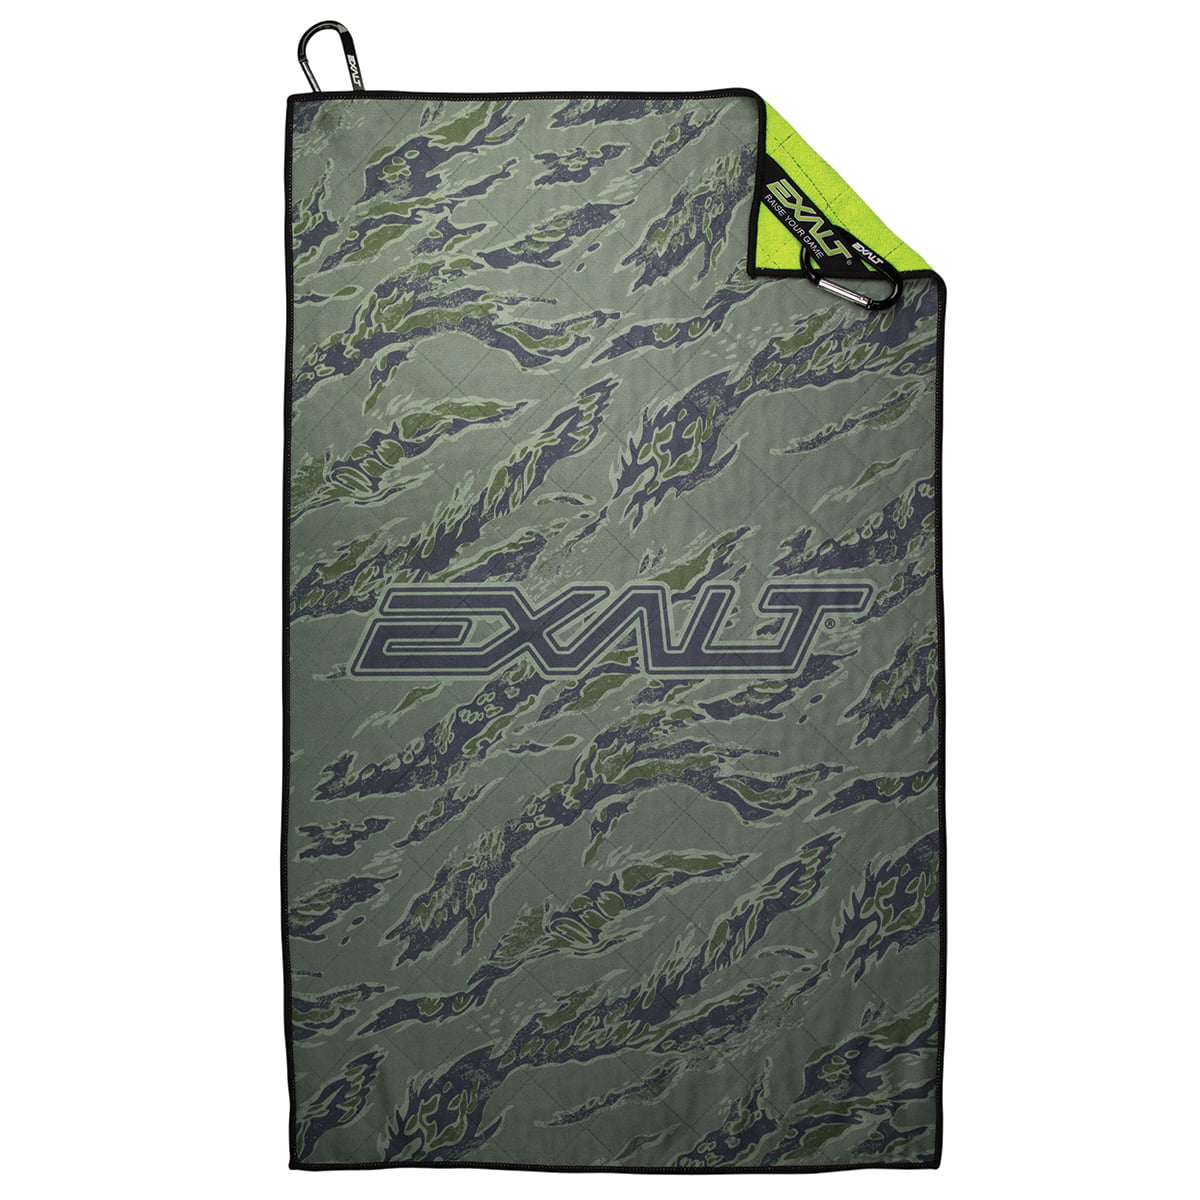 Includes Carabiners Team Size Exalt Paintball Microfiber Goggle Lens Cleaning Cloth 